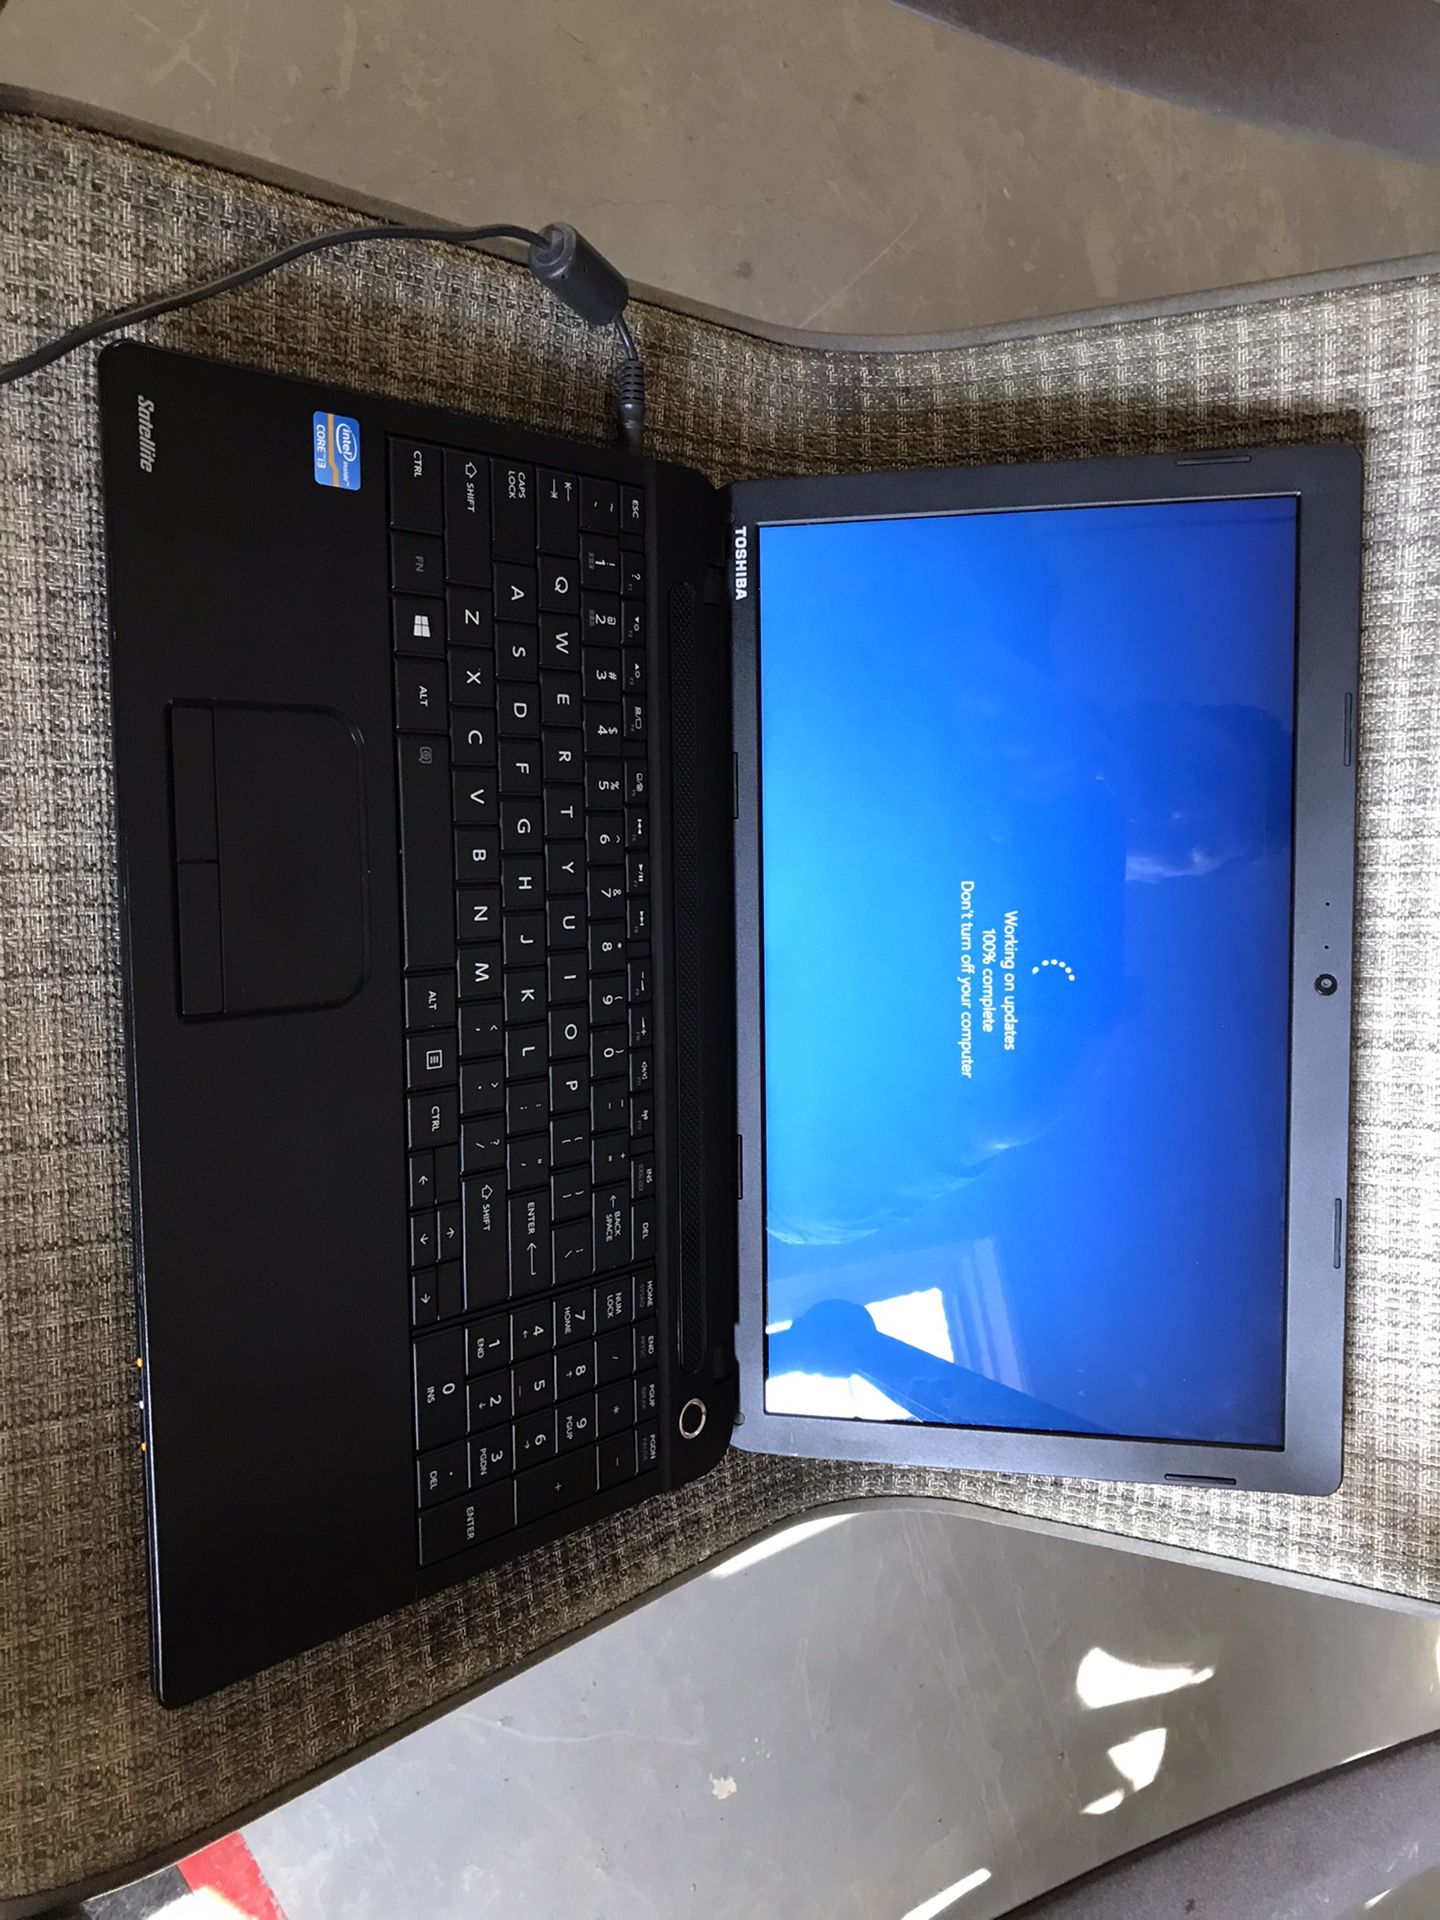 Toshiba Satellite Lap top with 2-new battery’s